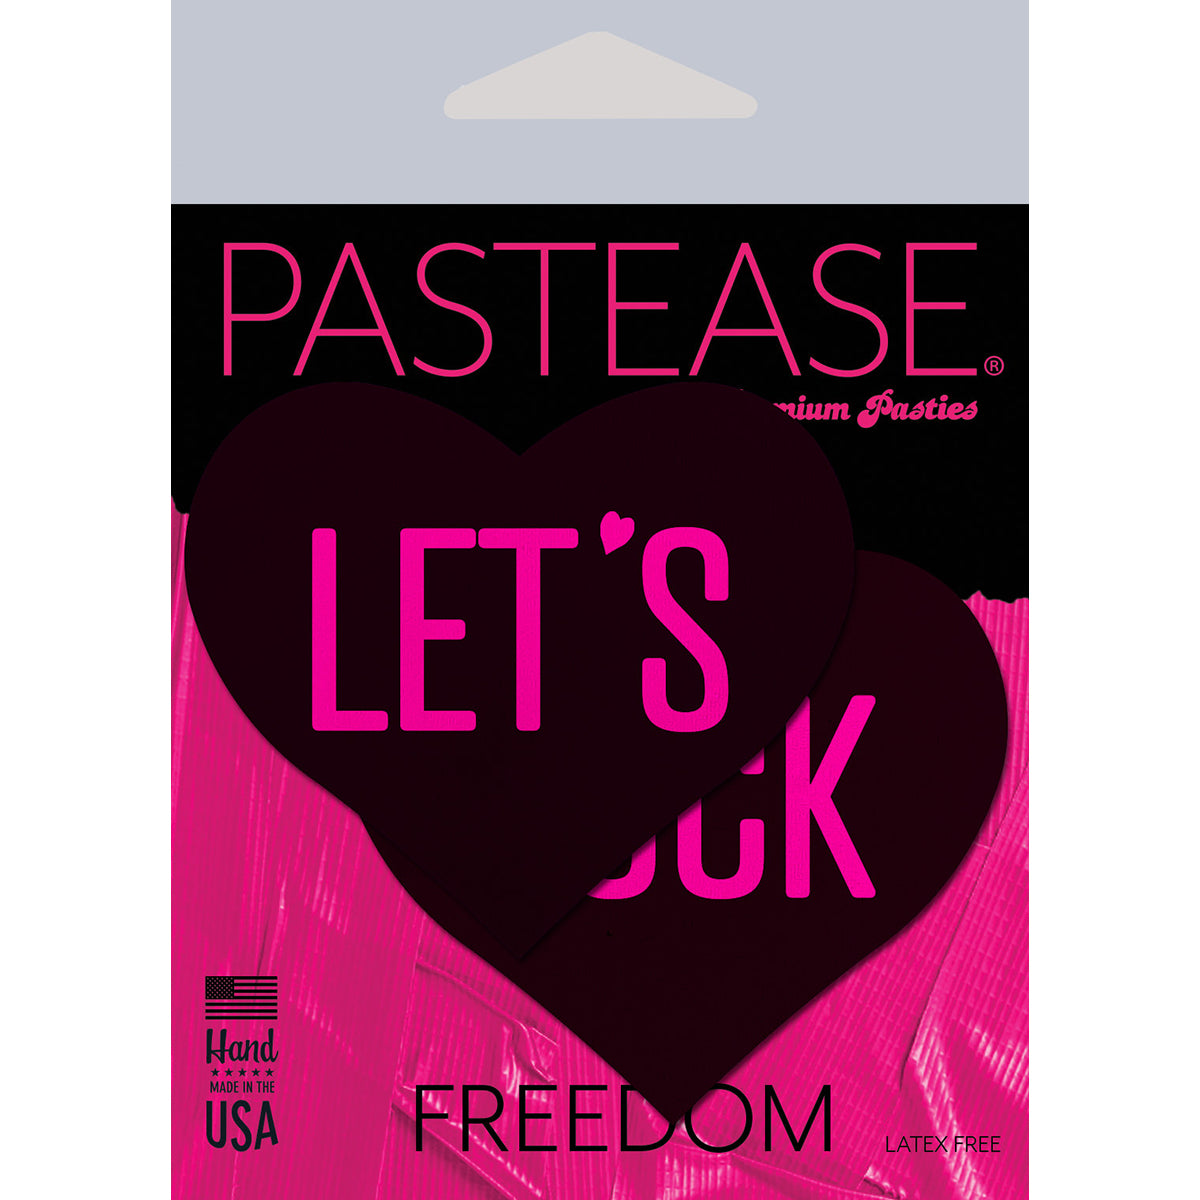 Pastease Let's Fuck Hearts Intimates Adult Boutique